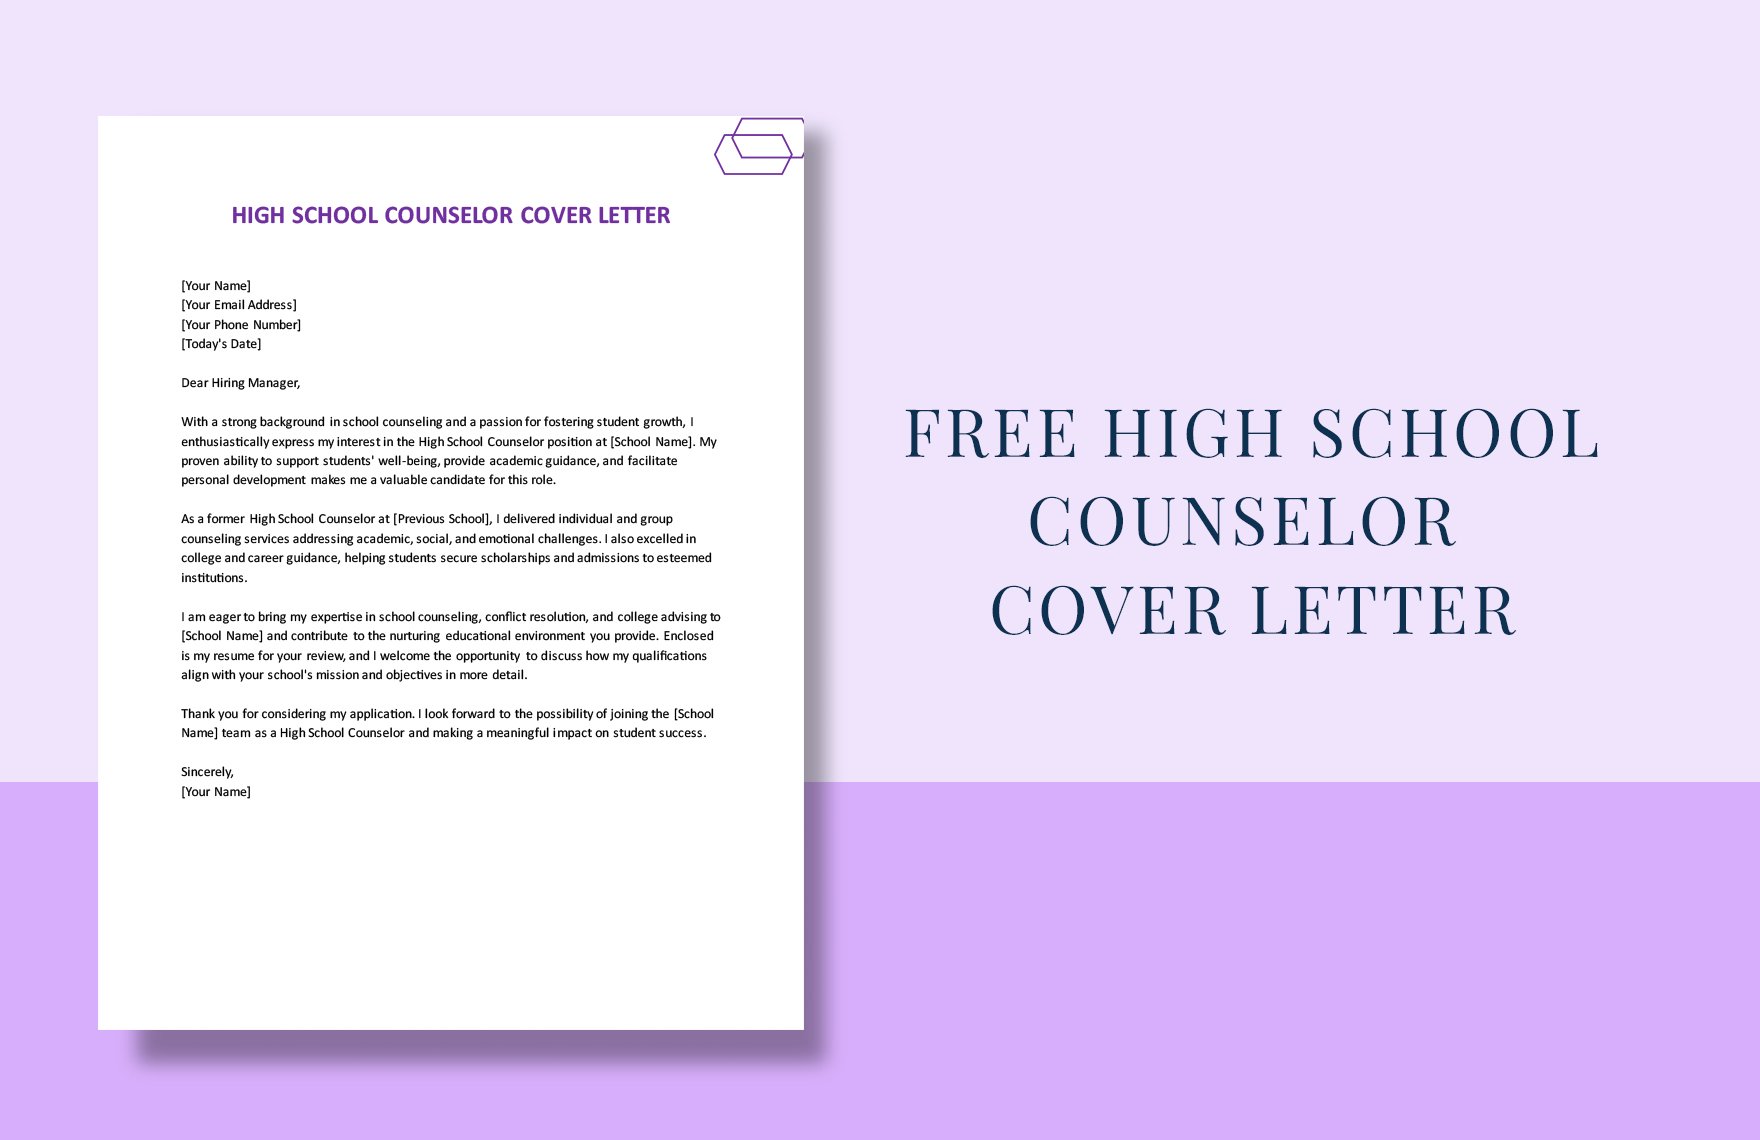 High School Counselor Cover Letter in Word, Google Docs, PDF